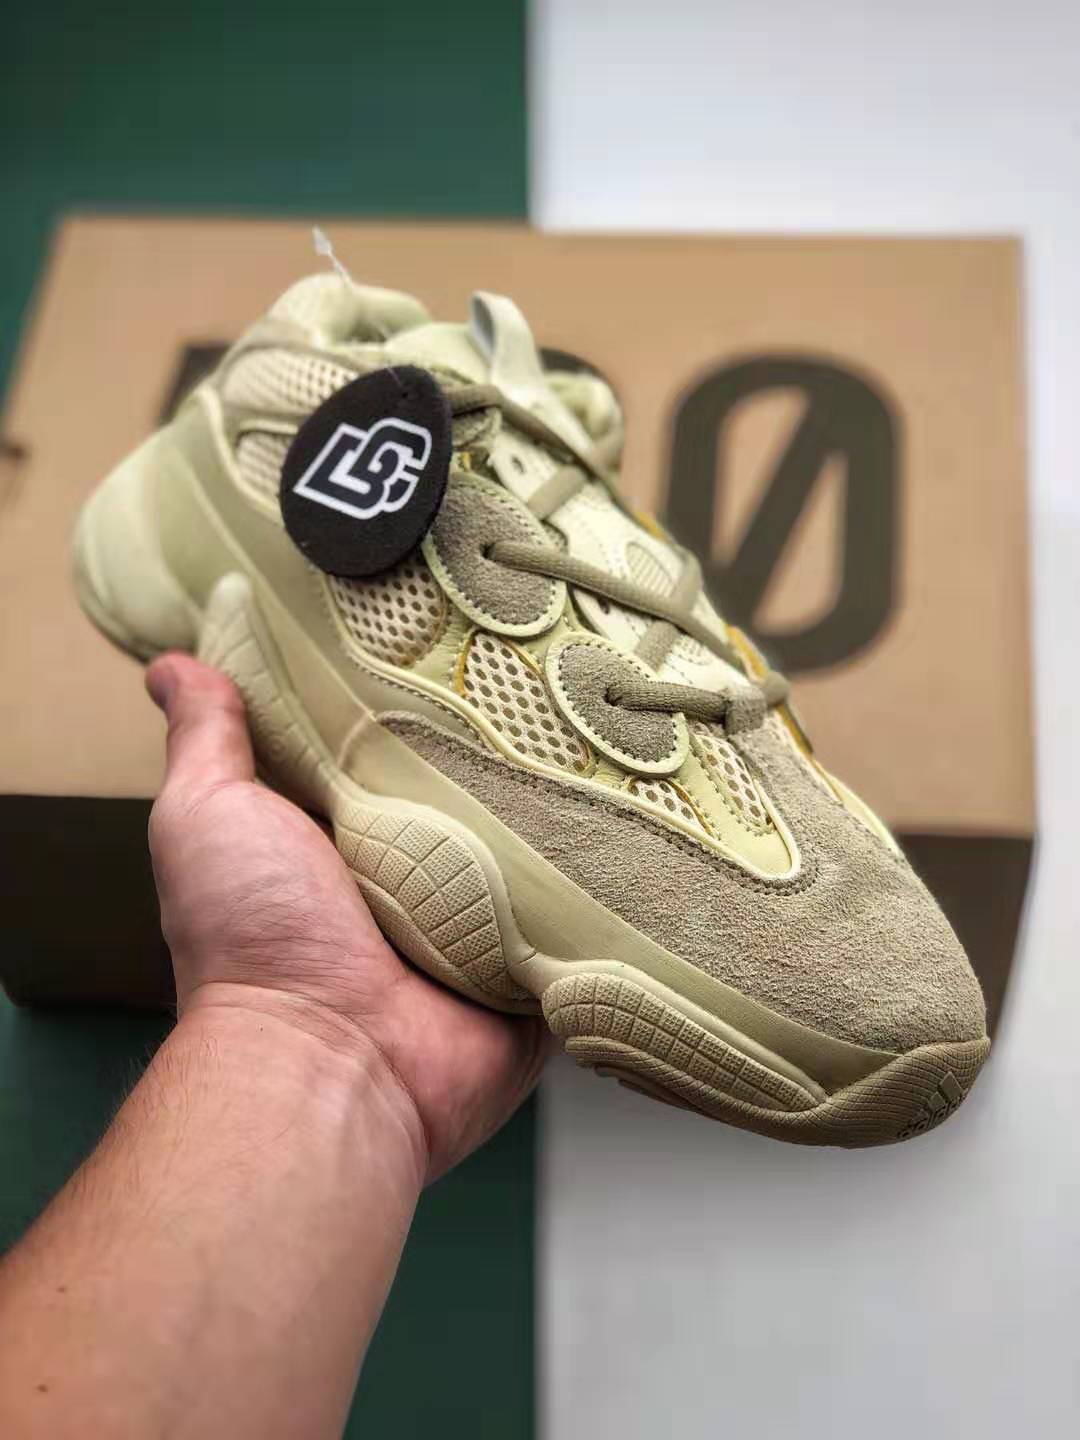 Adidas Yeezy 500 Super Moon Yellow DB2966 - Official Release & Limited Edition